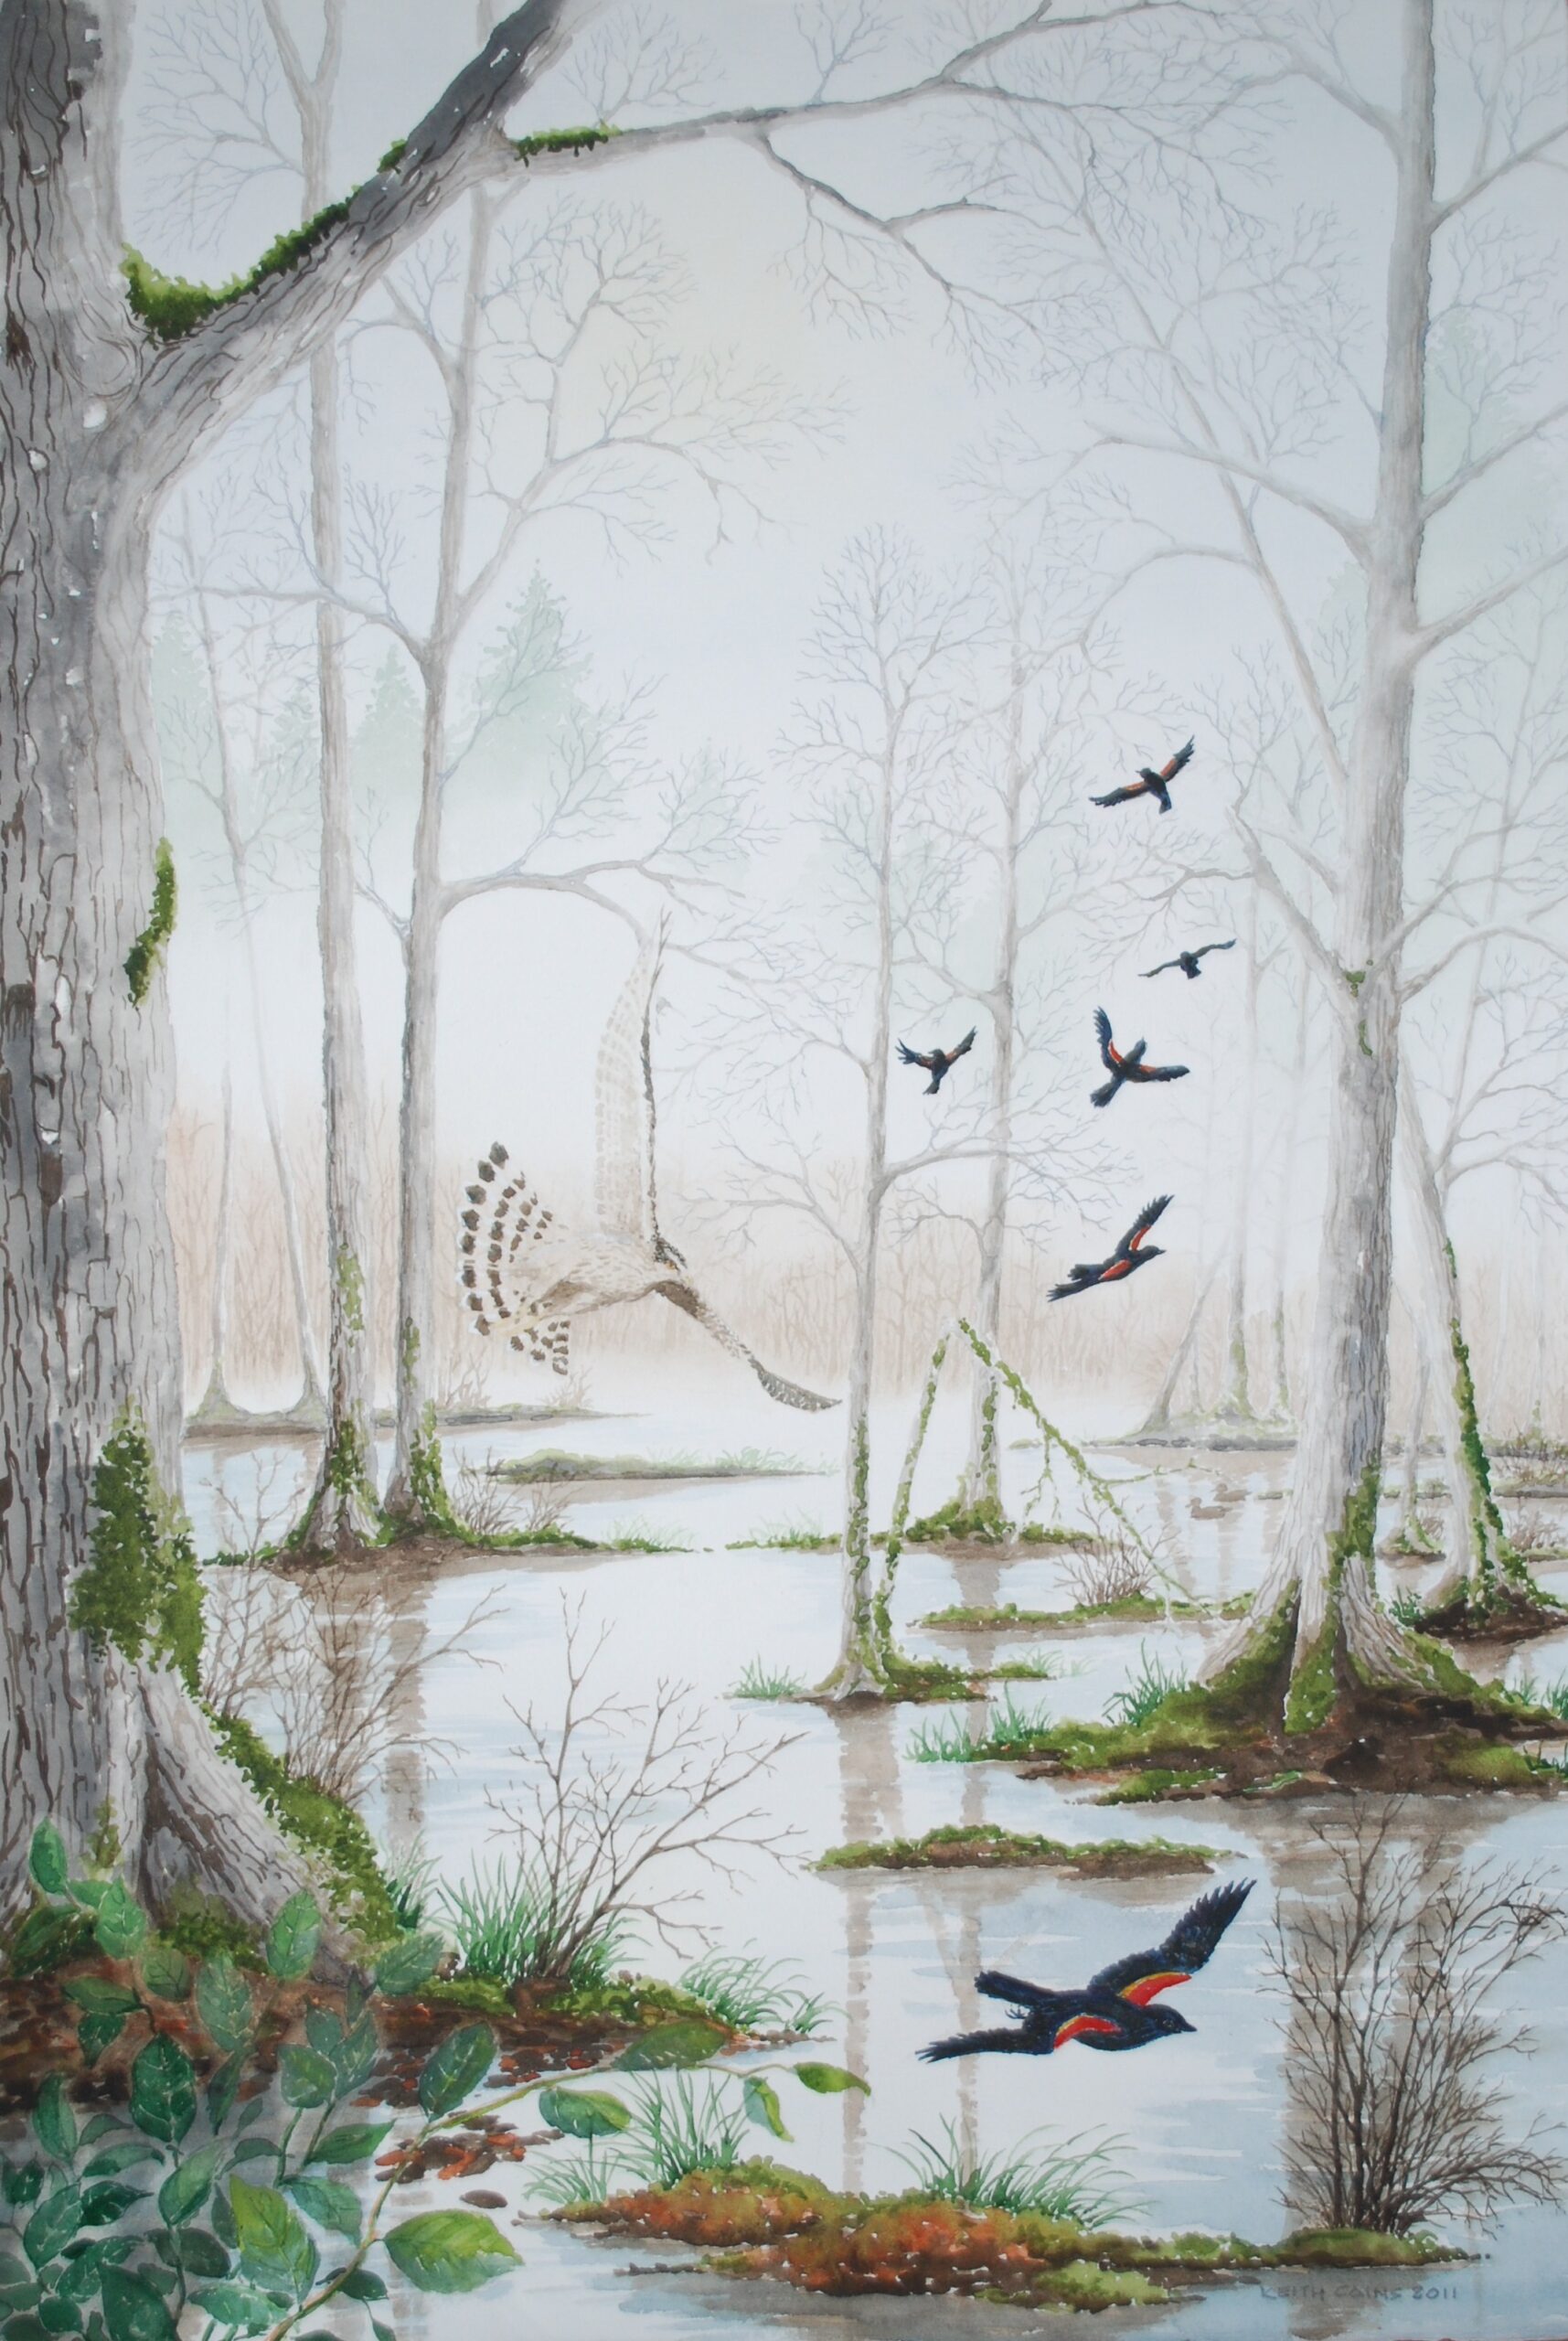 A water colour painting of a goshawk and some redwing blackbirds in a forest setting by Keith Cains.